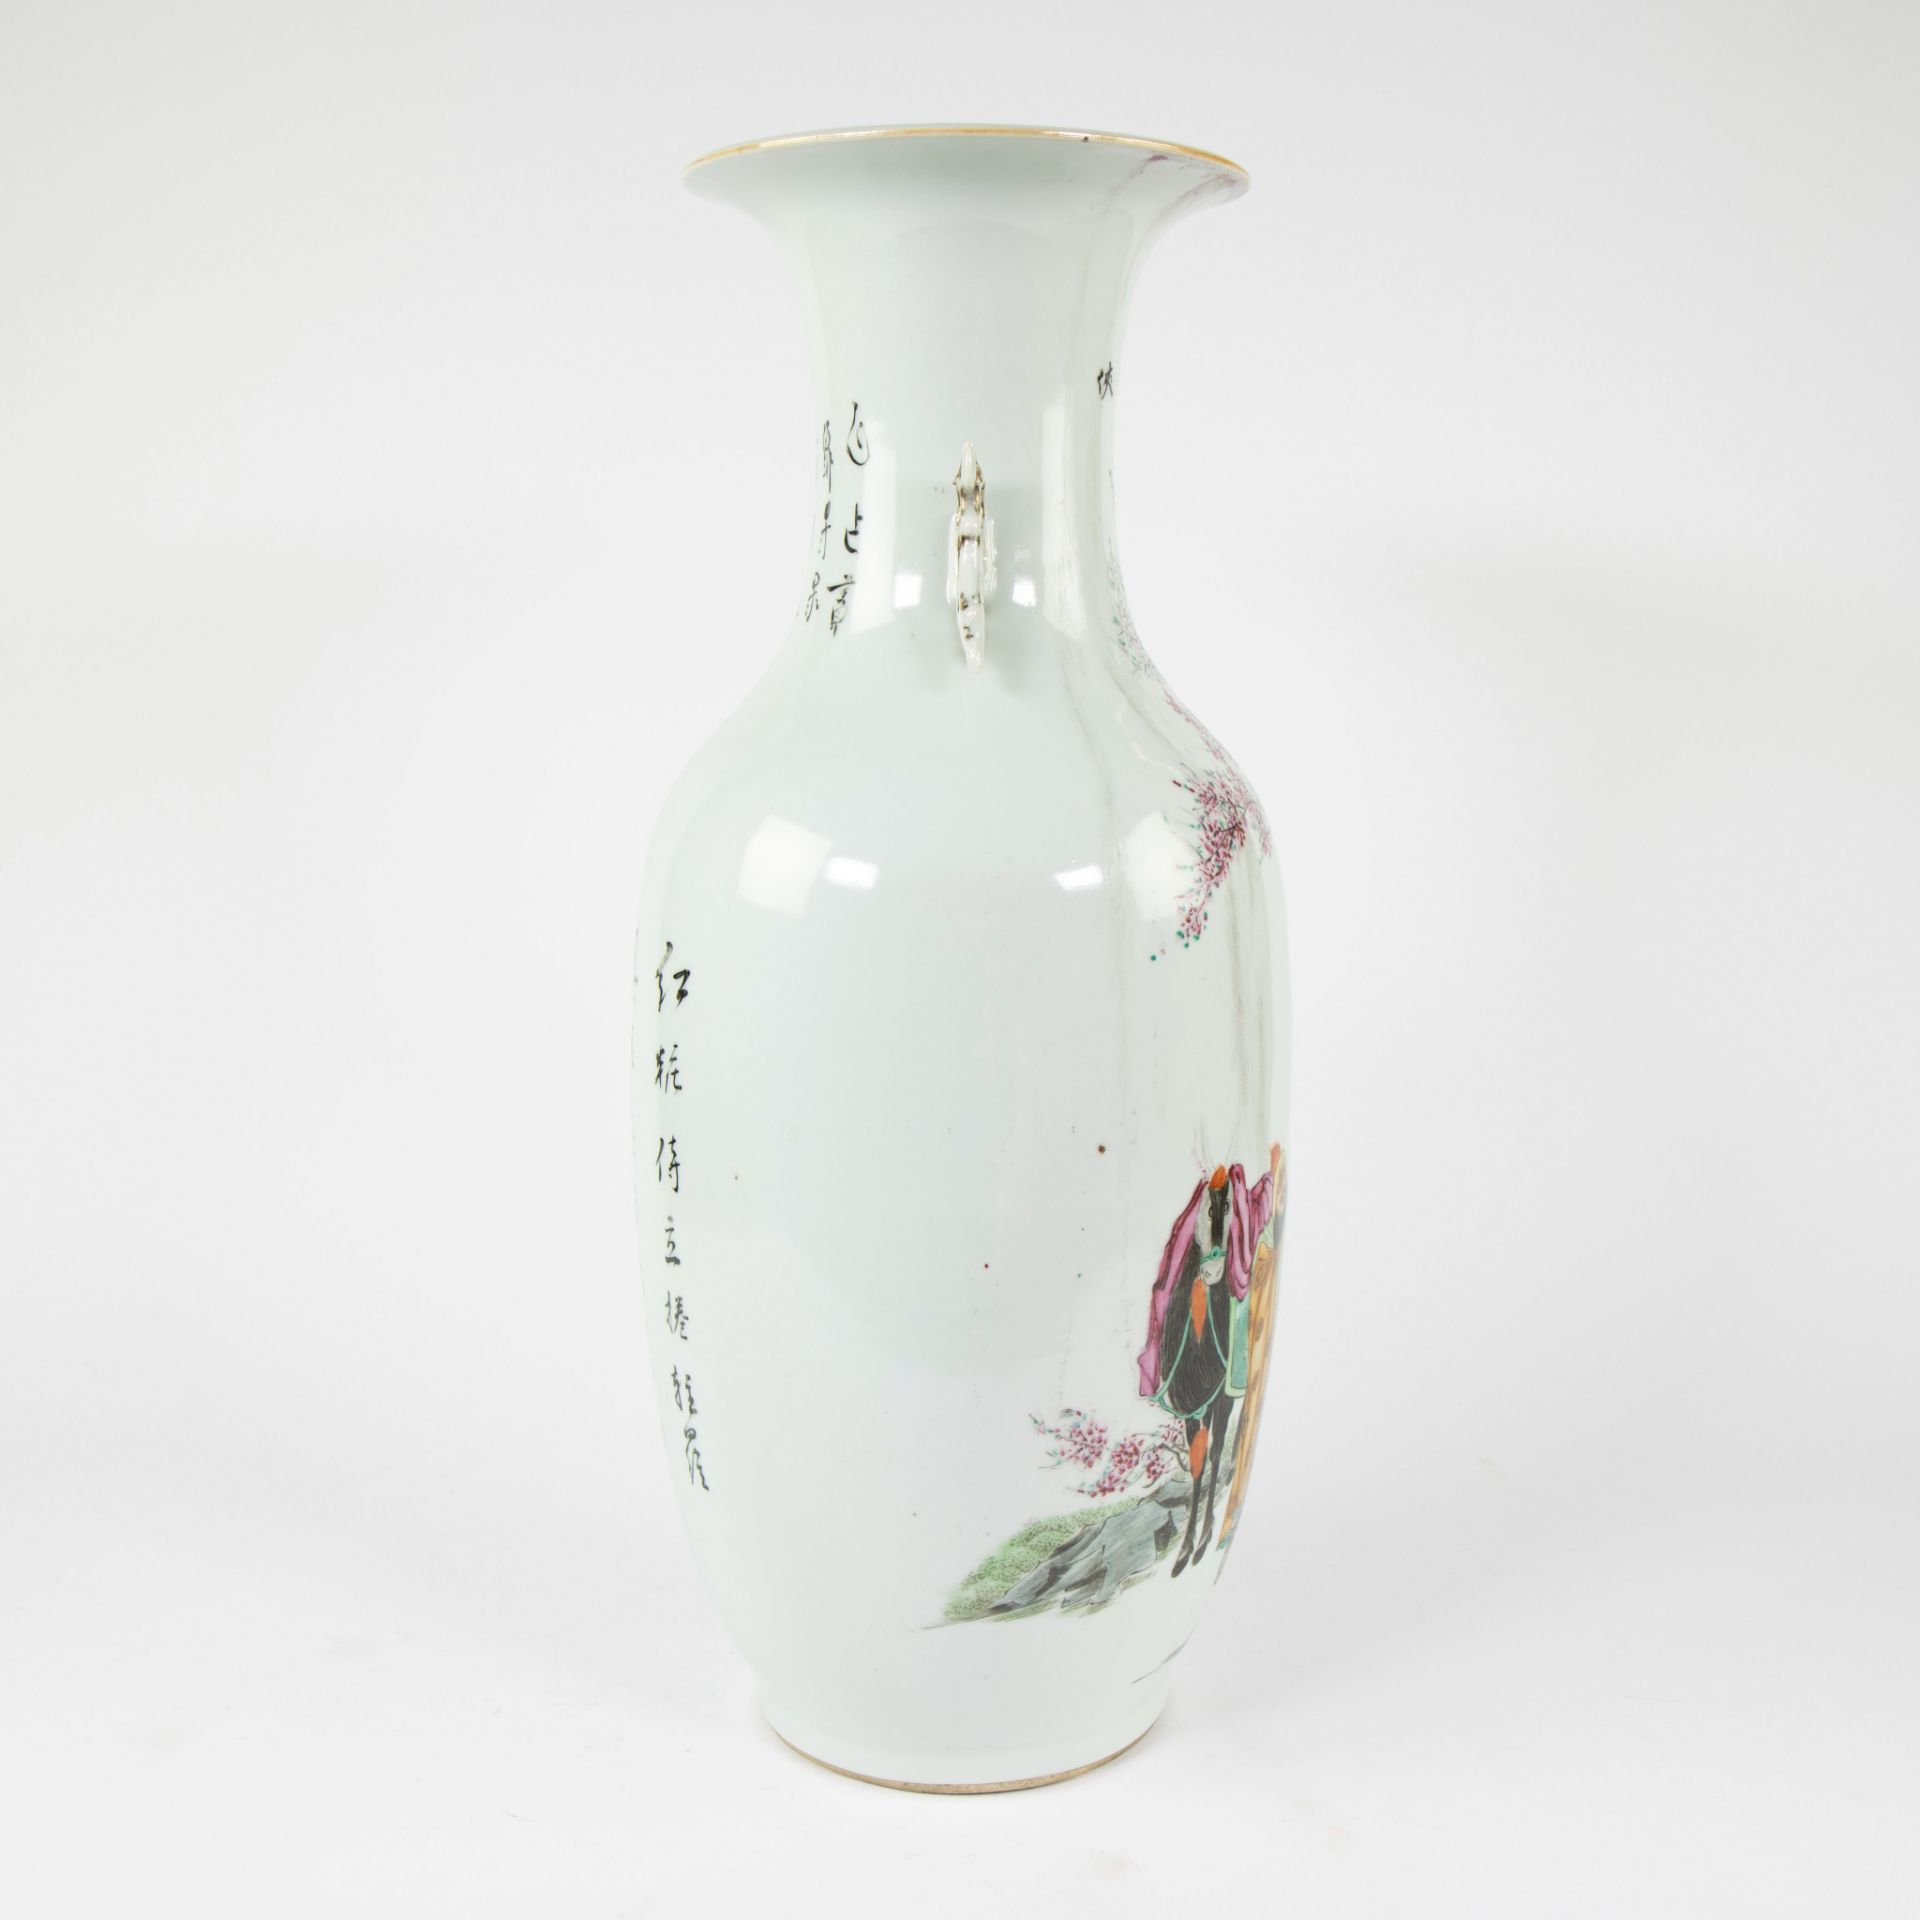 19th century Chinese famille rose vase decorated with figures and Chinese texts - Image 8 of 11